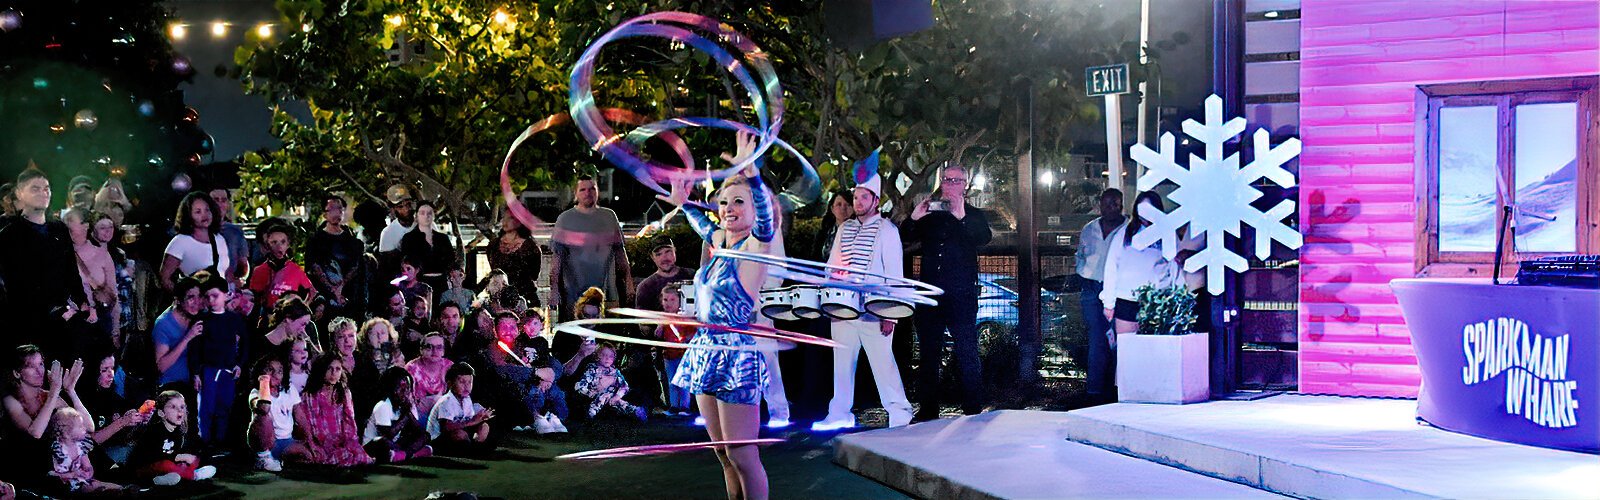 To celebrate the holiday season, a hoop dancer entertains a captive audience with her amazing skills at Sparkman Wharf 's Winter Wonder Wharf.